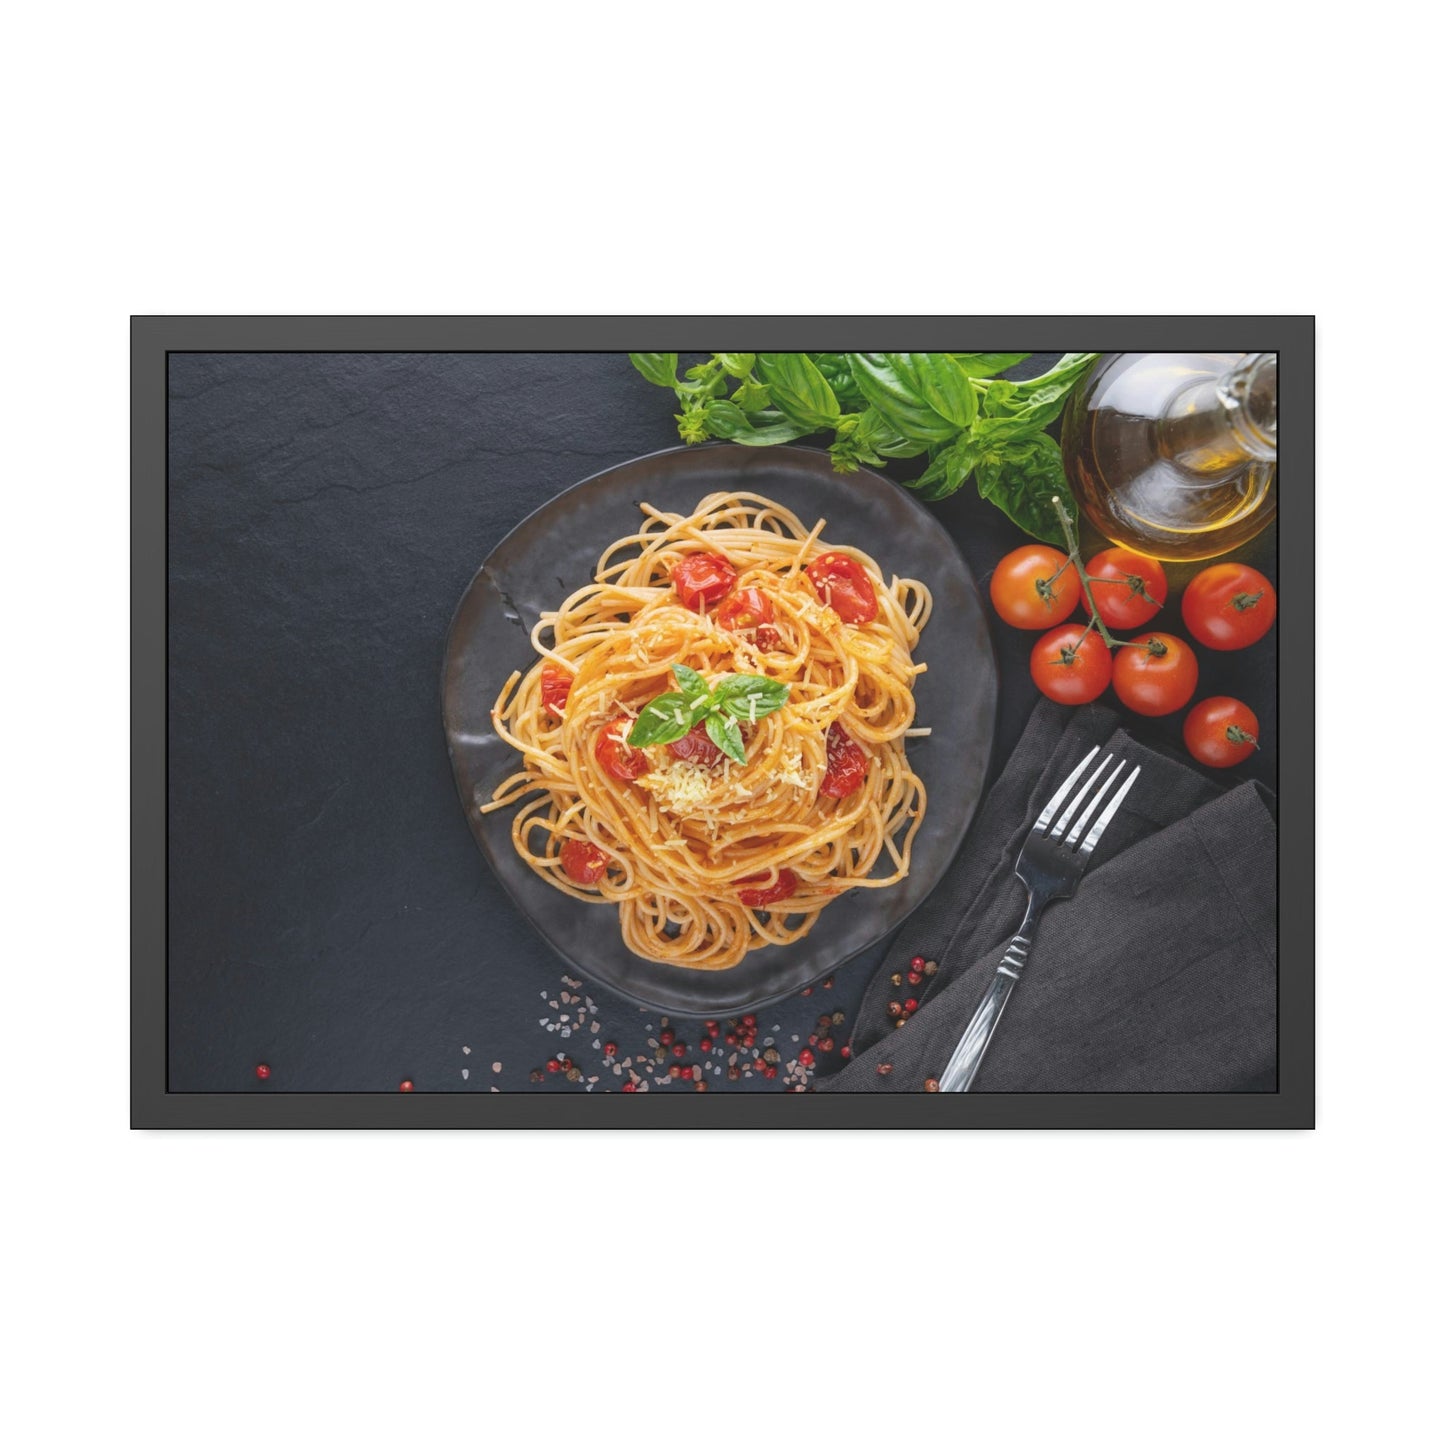 Delectable Pasta Delights: Artistic Print on Canvas & Poster for Your Home Decor